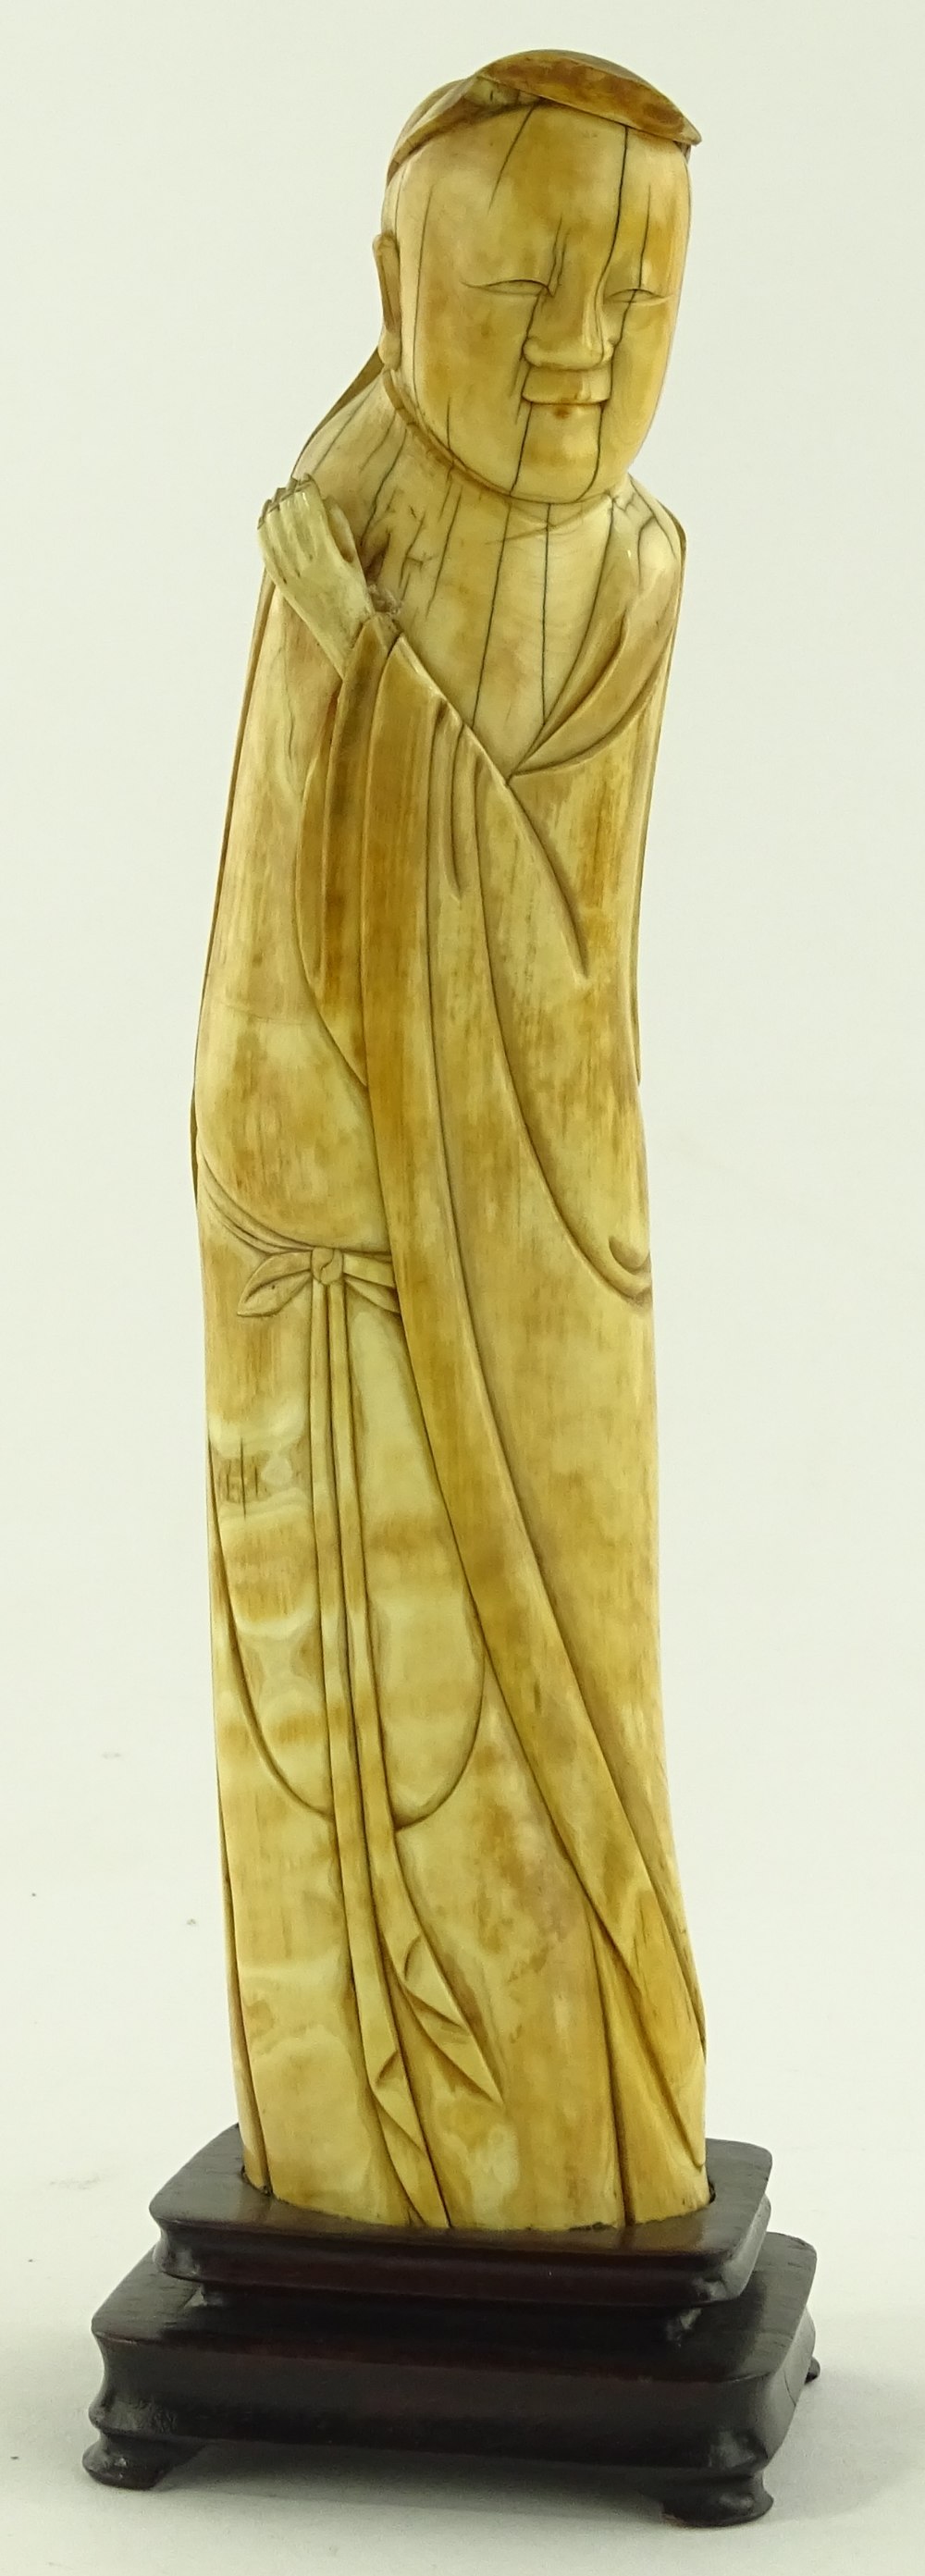 A 17th century carved ivory figure of a monk, with